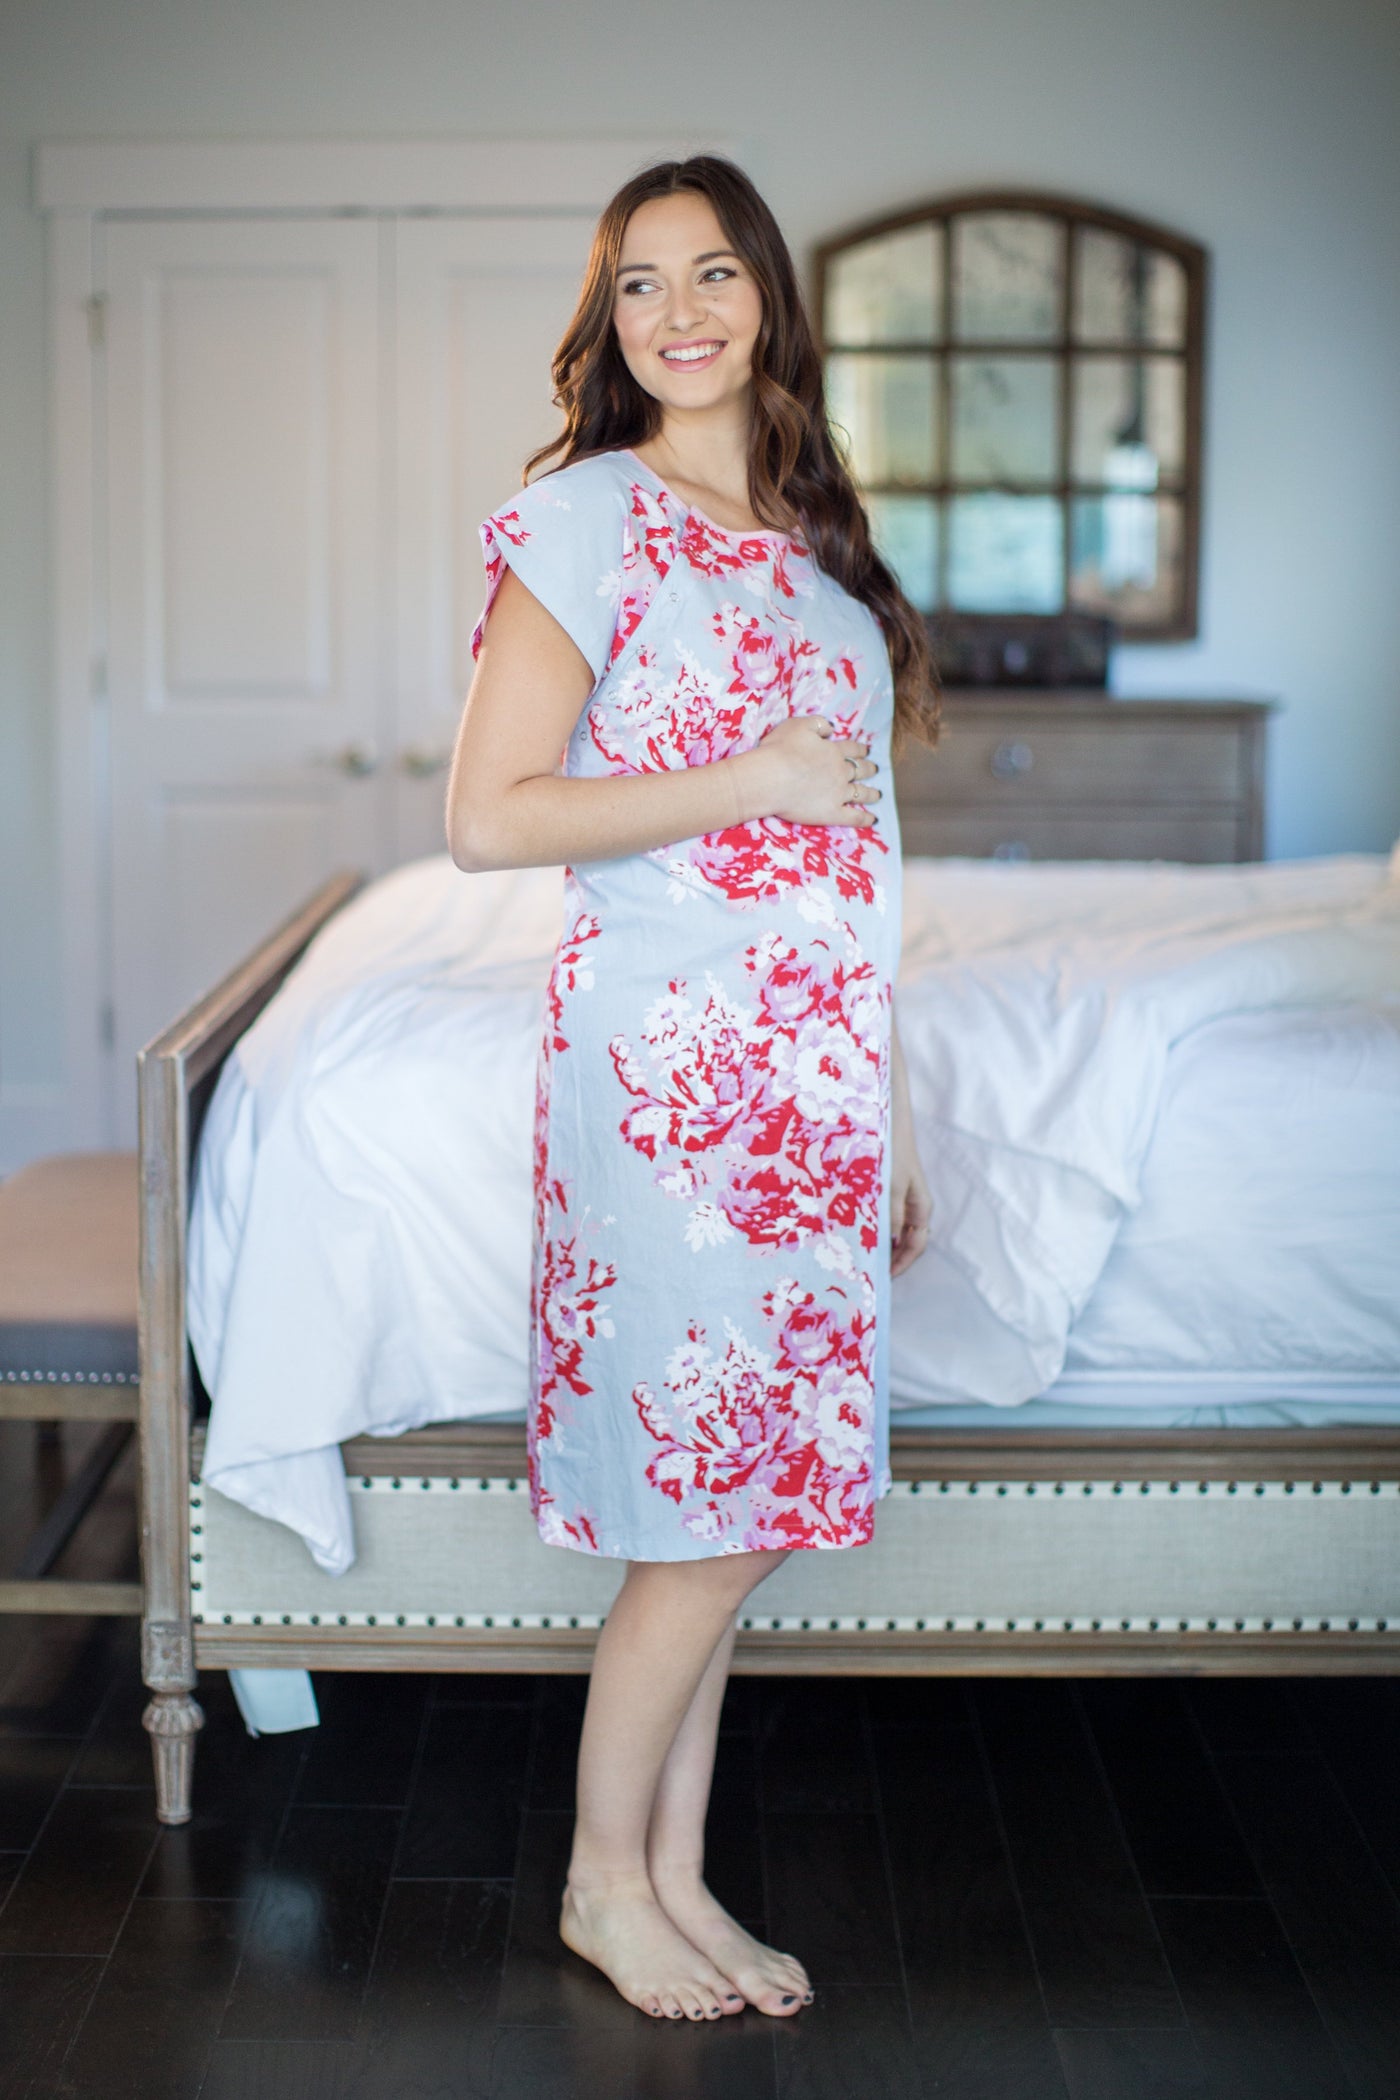 Mae Gownie Maternity Delivery Labor Hospital Birthing Gown – Gownies™